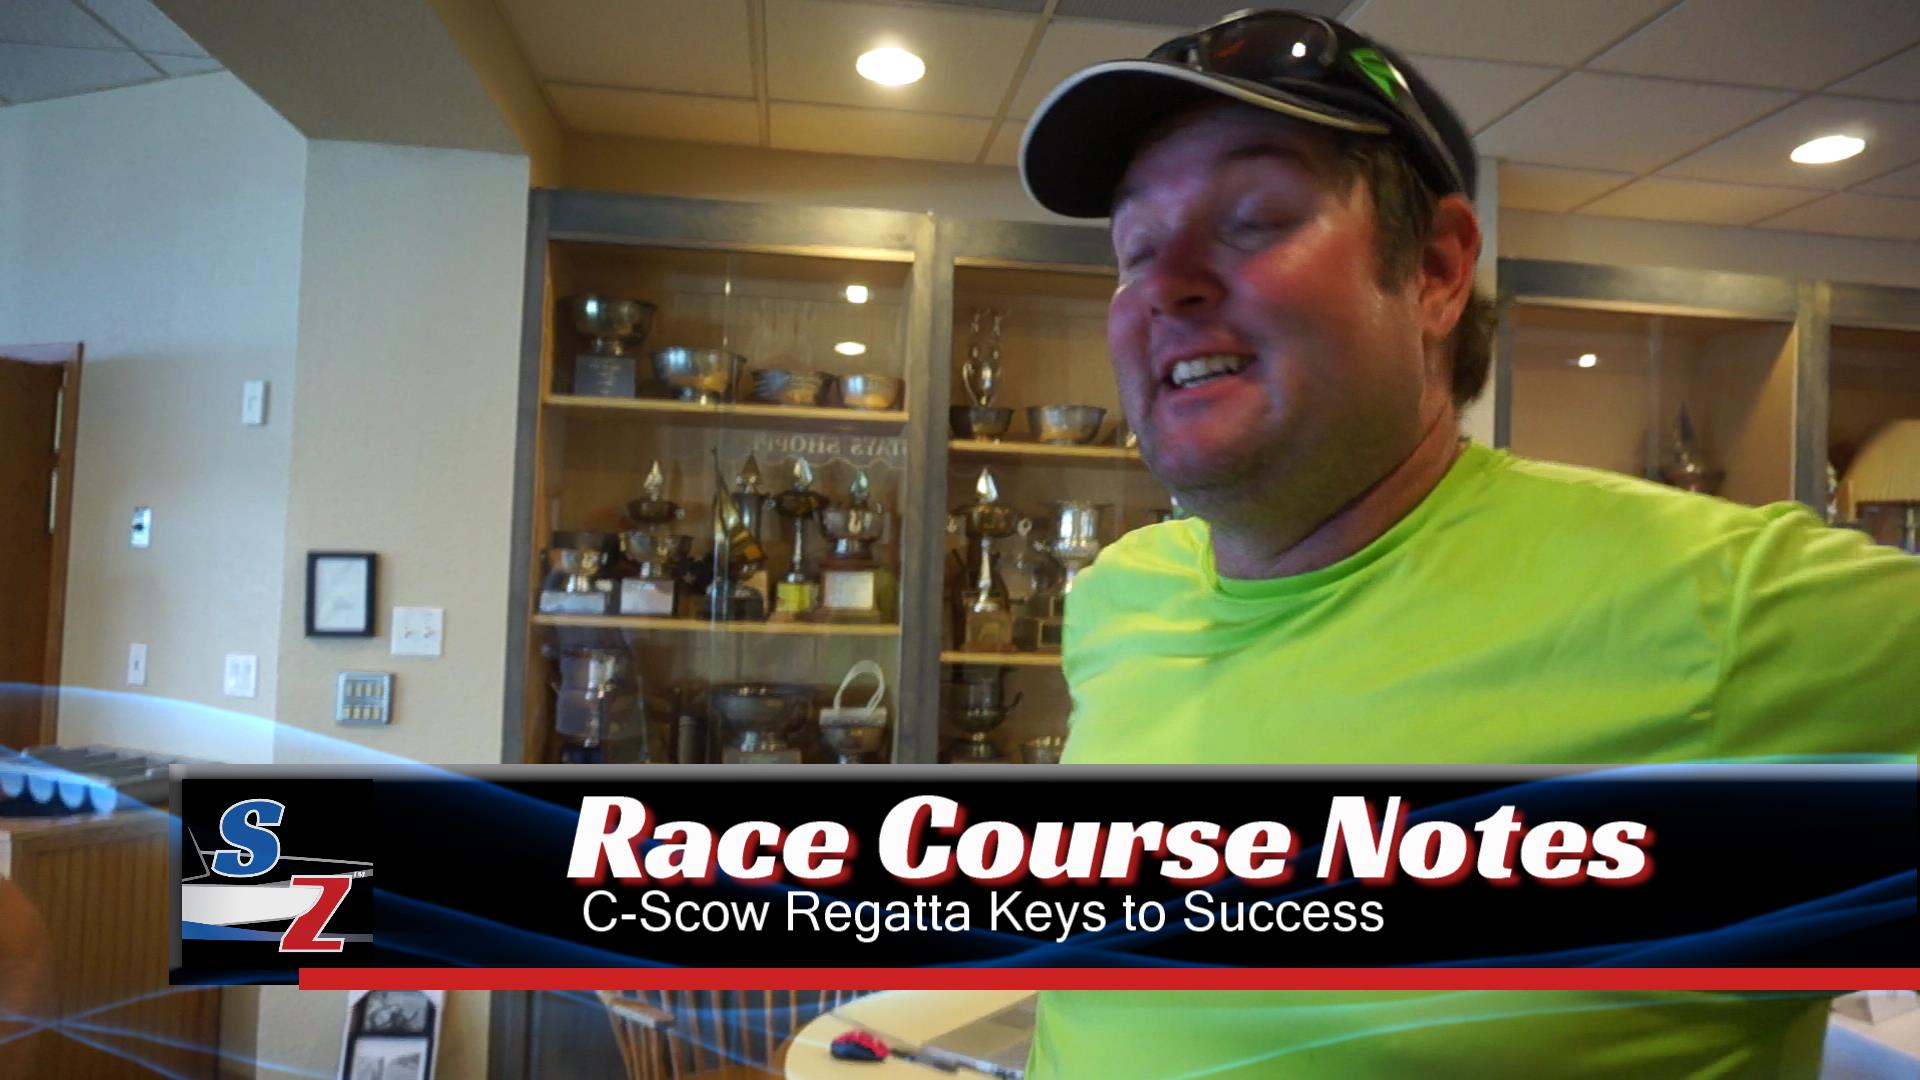 Top C-Scow Finishers Share Keys to Success – Race Course Notes